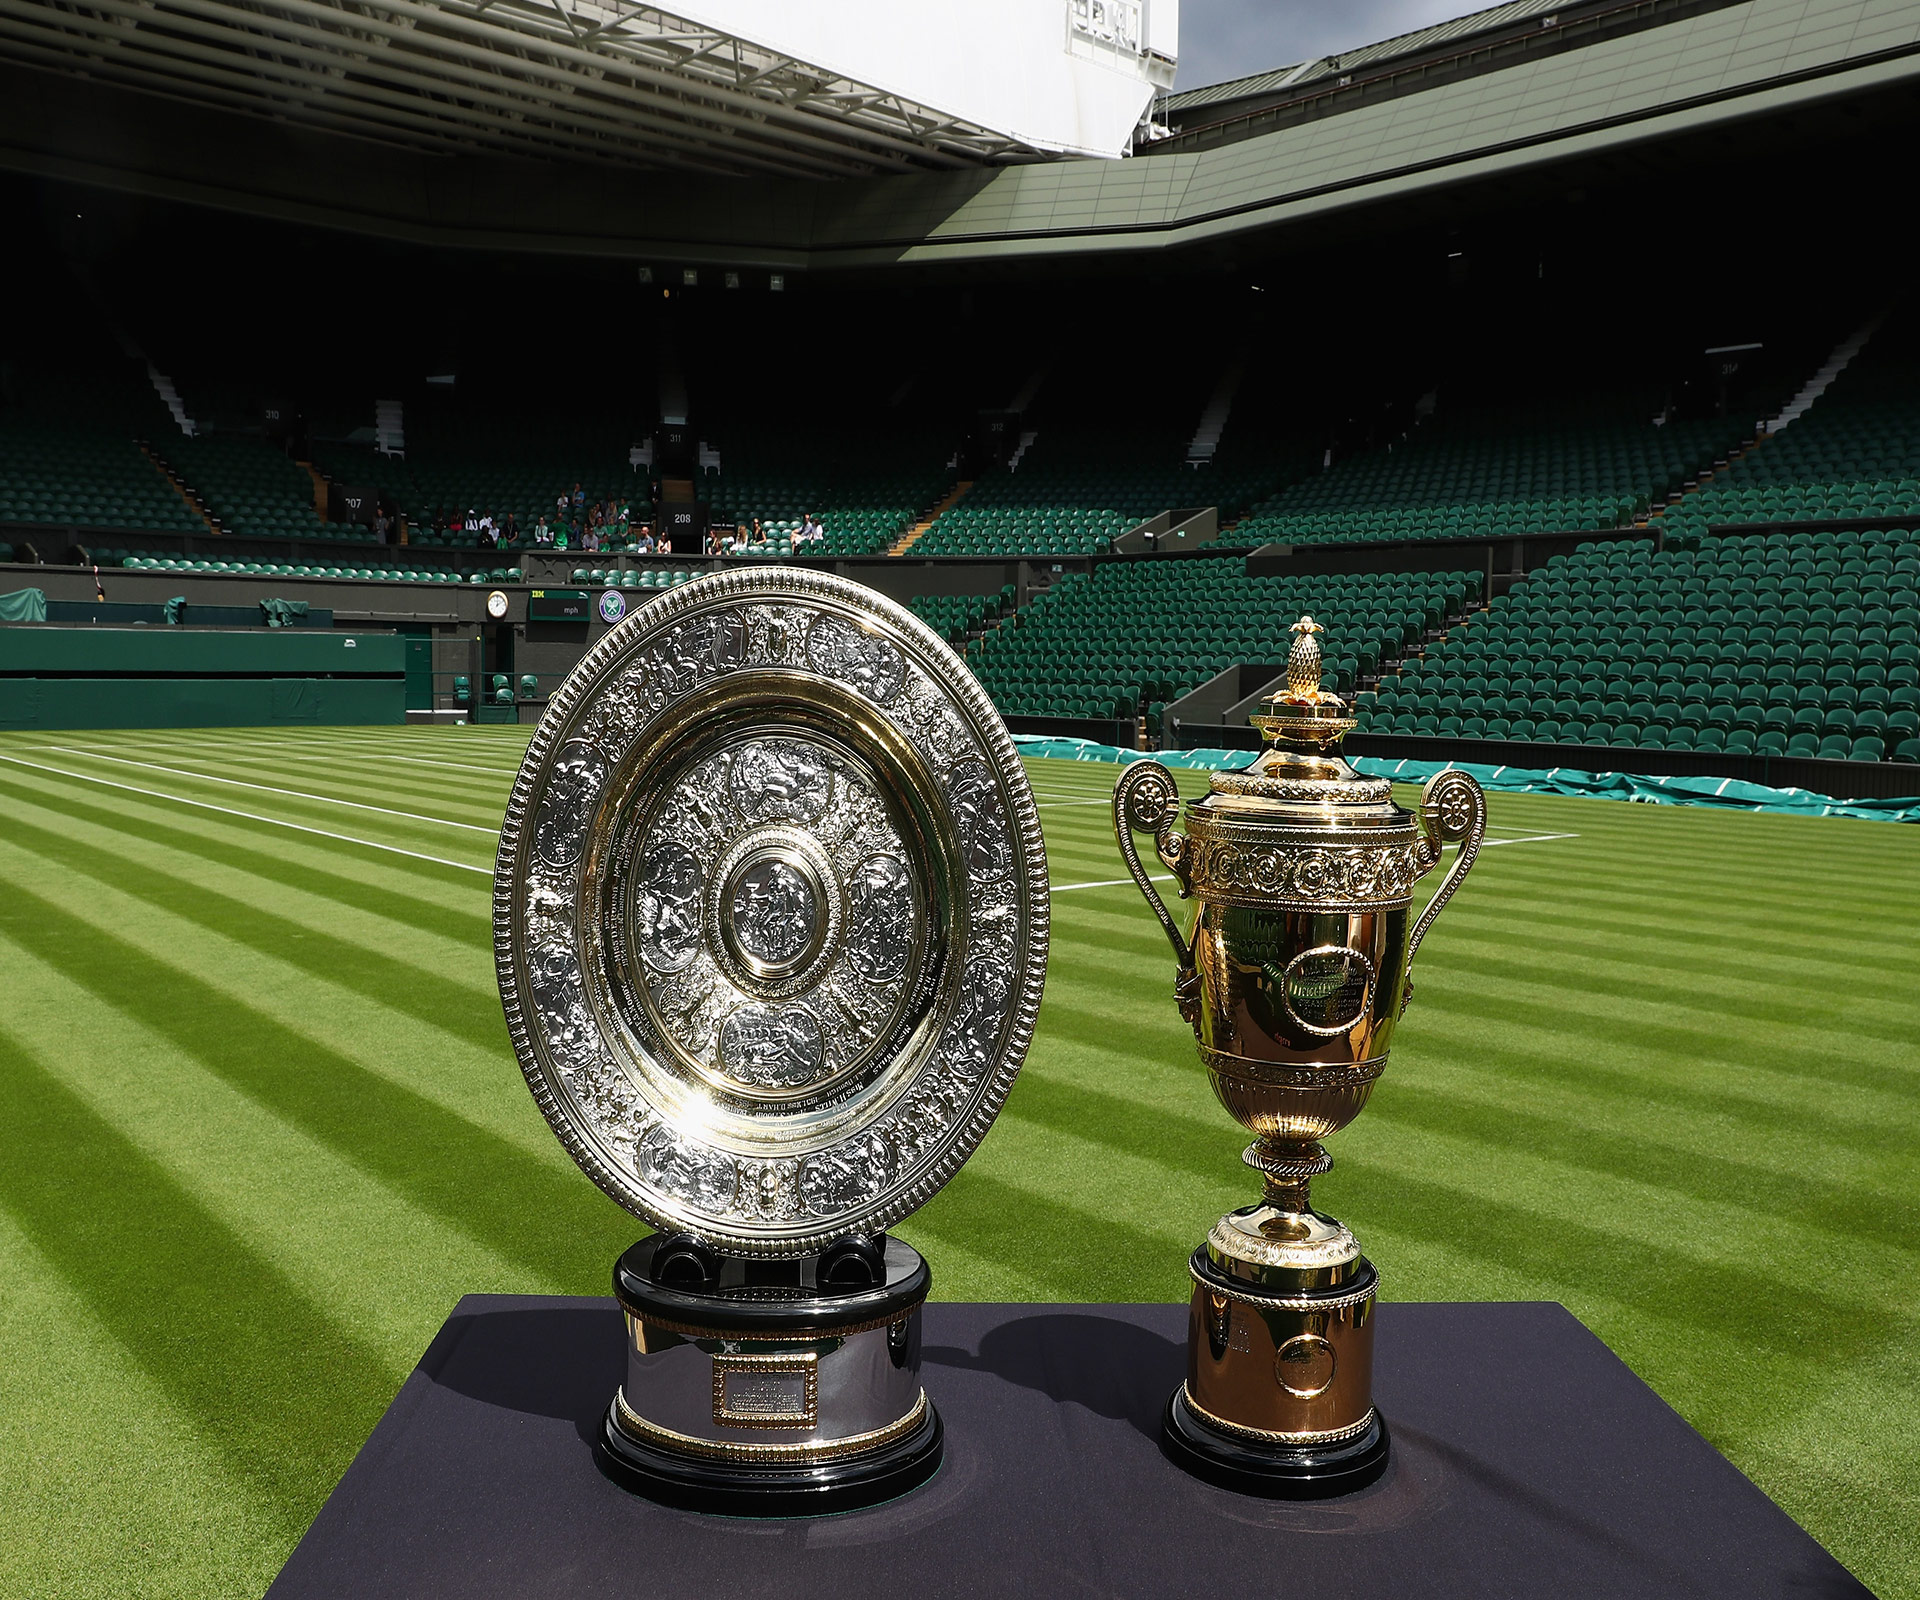 Everything you need to know about Wimbledon 2017